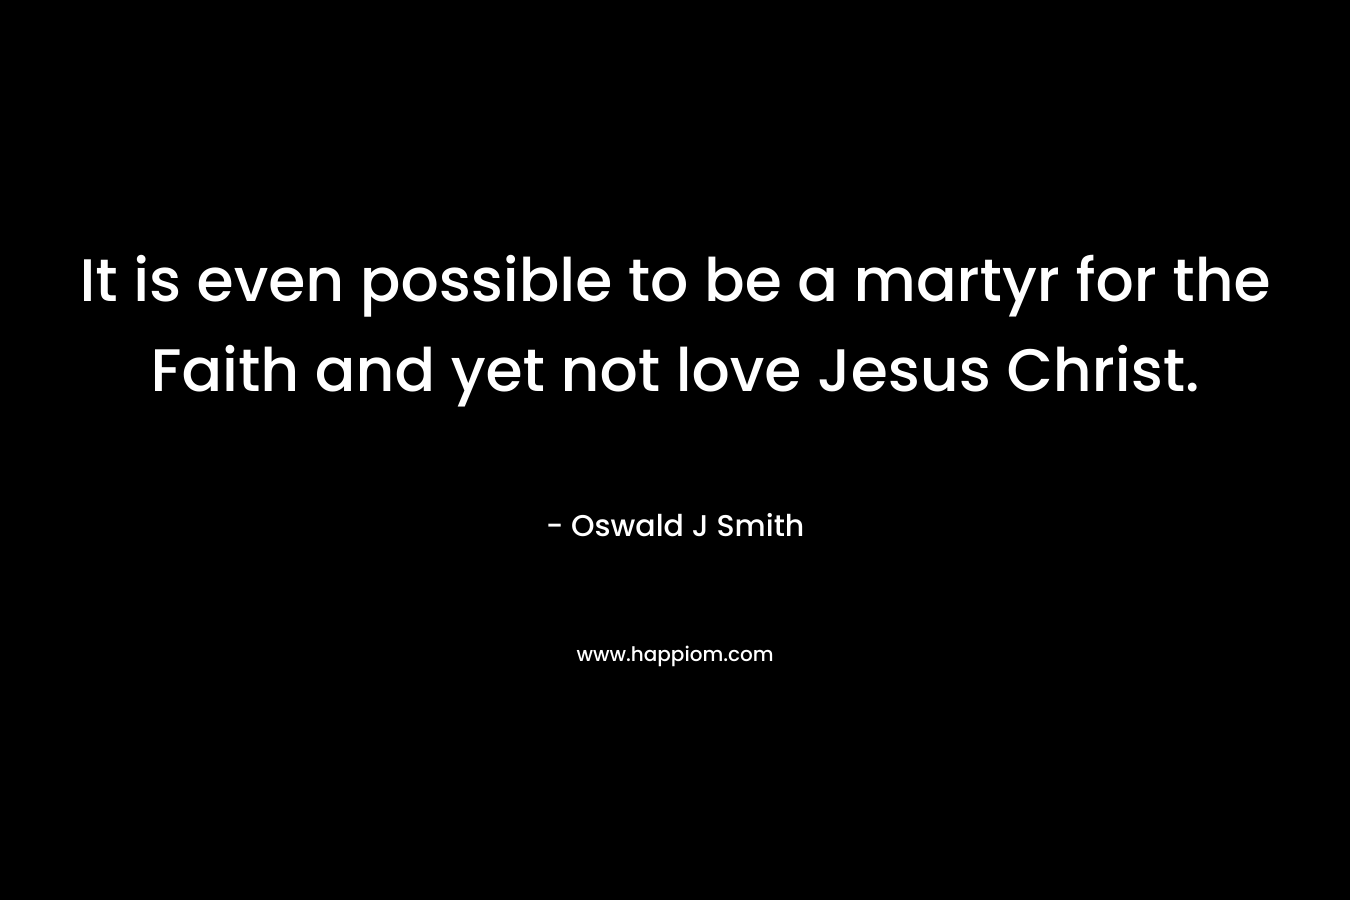 It is even possible to be a martyr for the Faith and yet not love Jesus Christ.